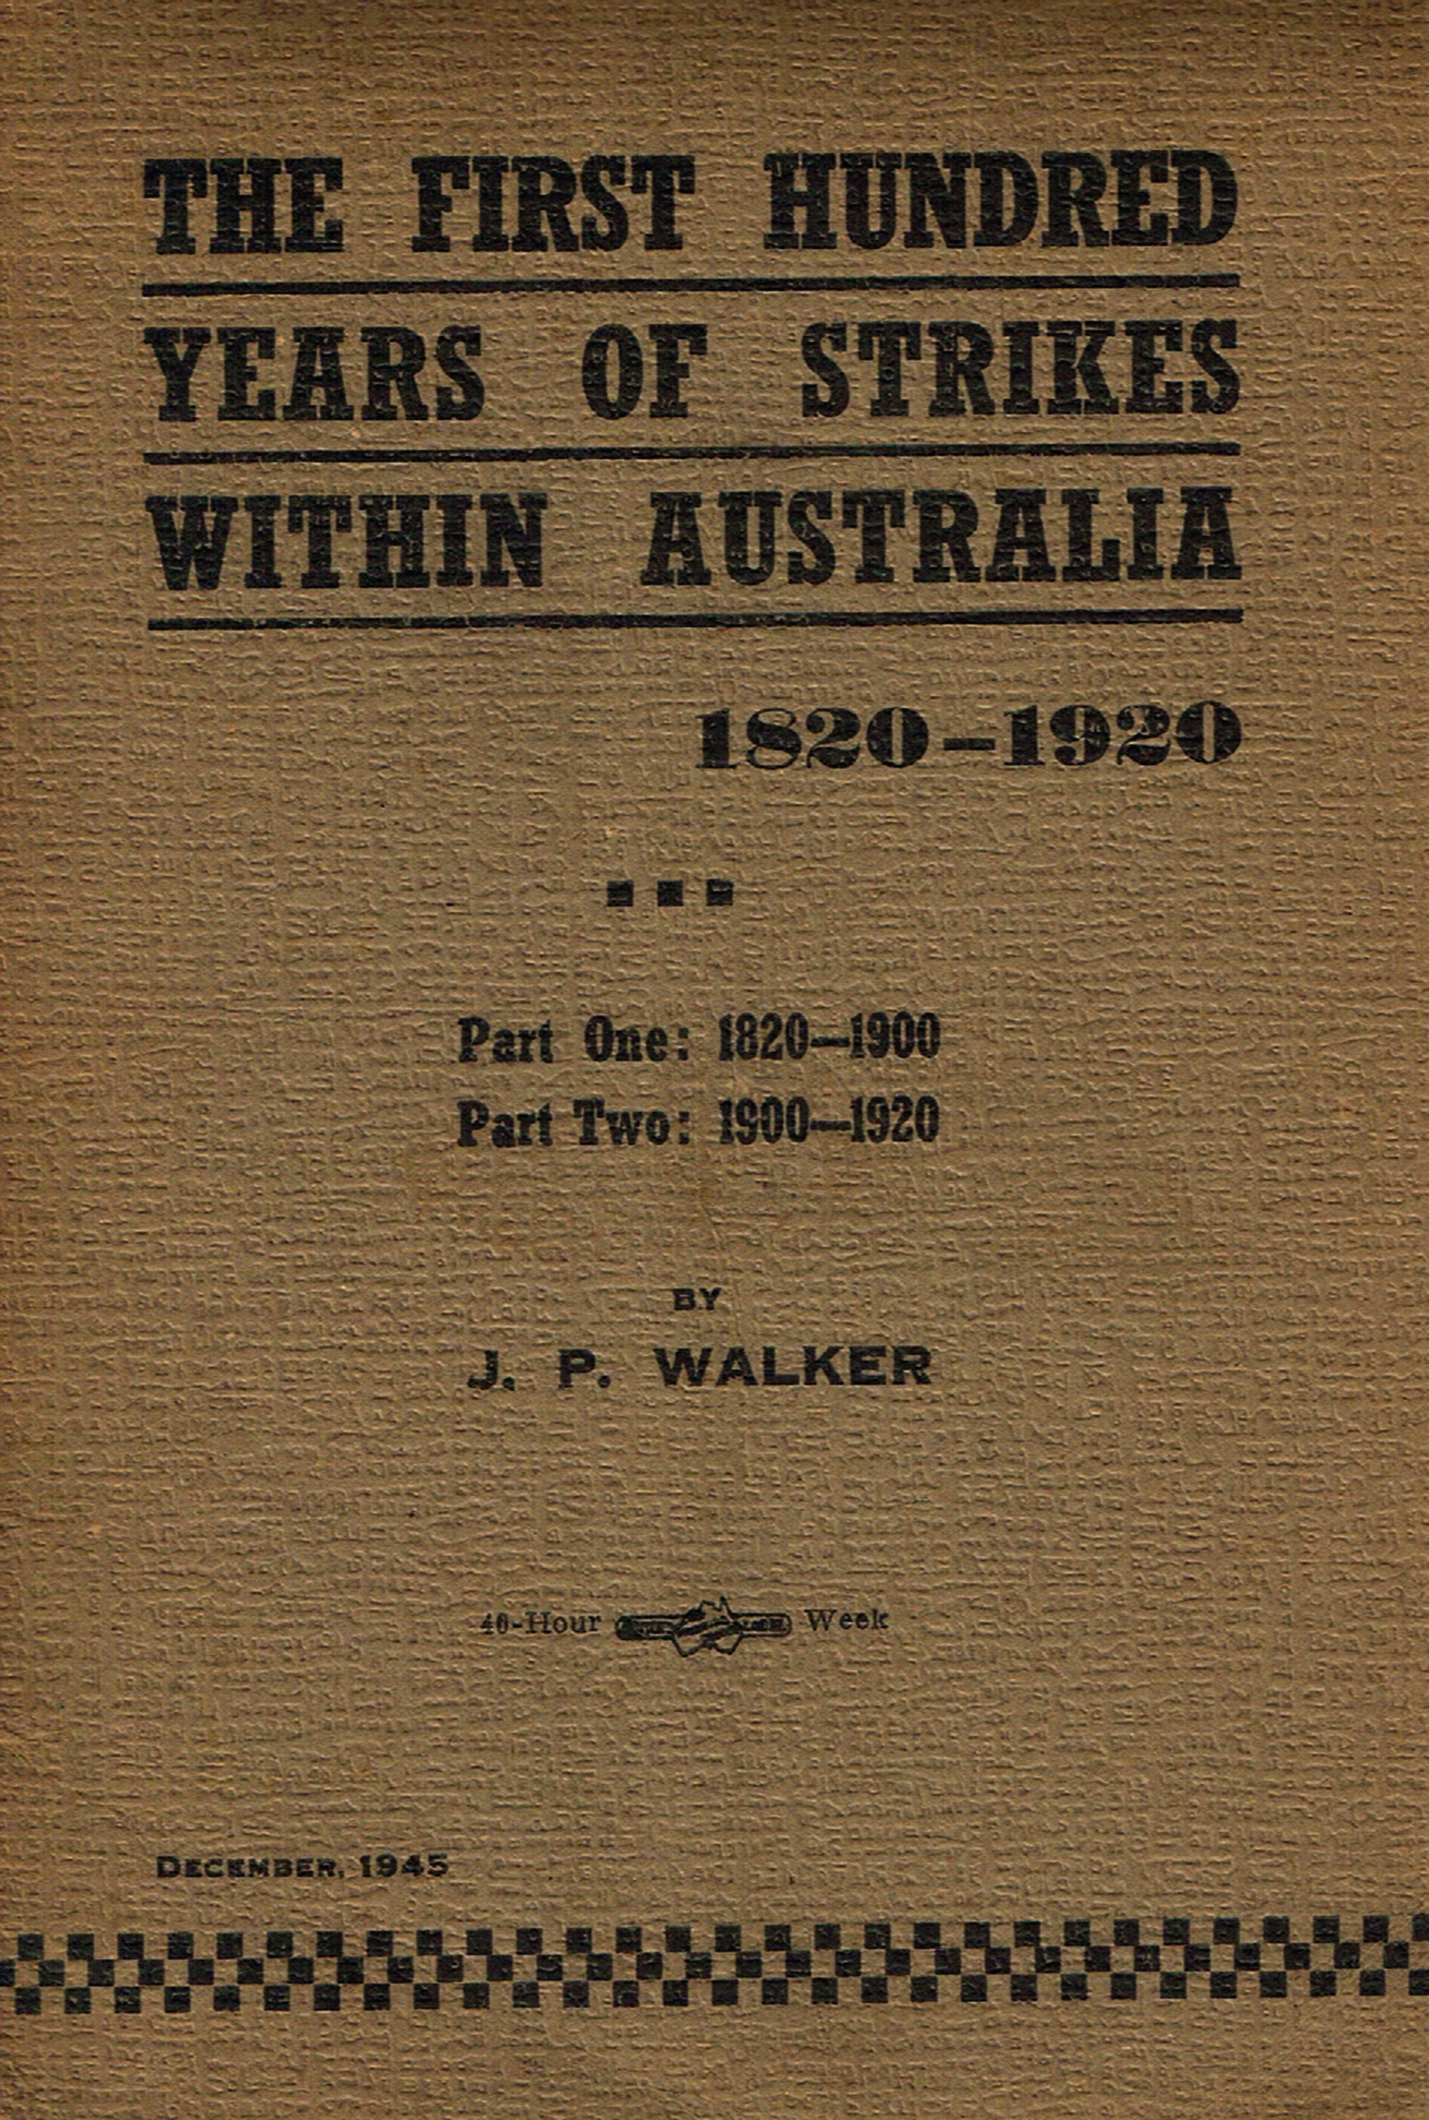 The First 100 Years of Strikes Within Australia